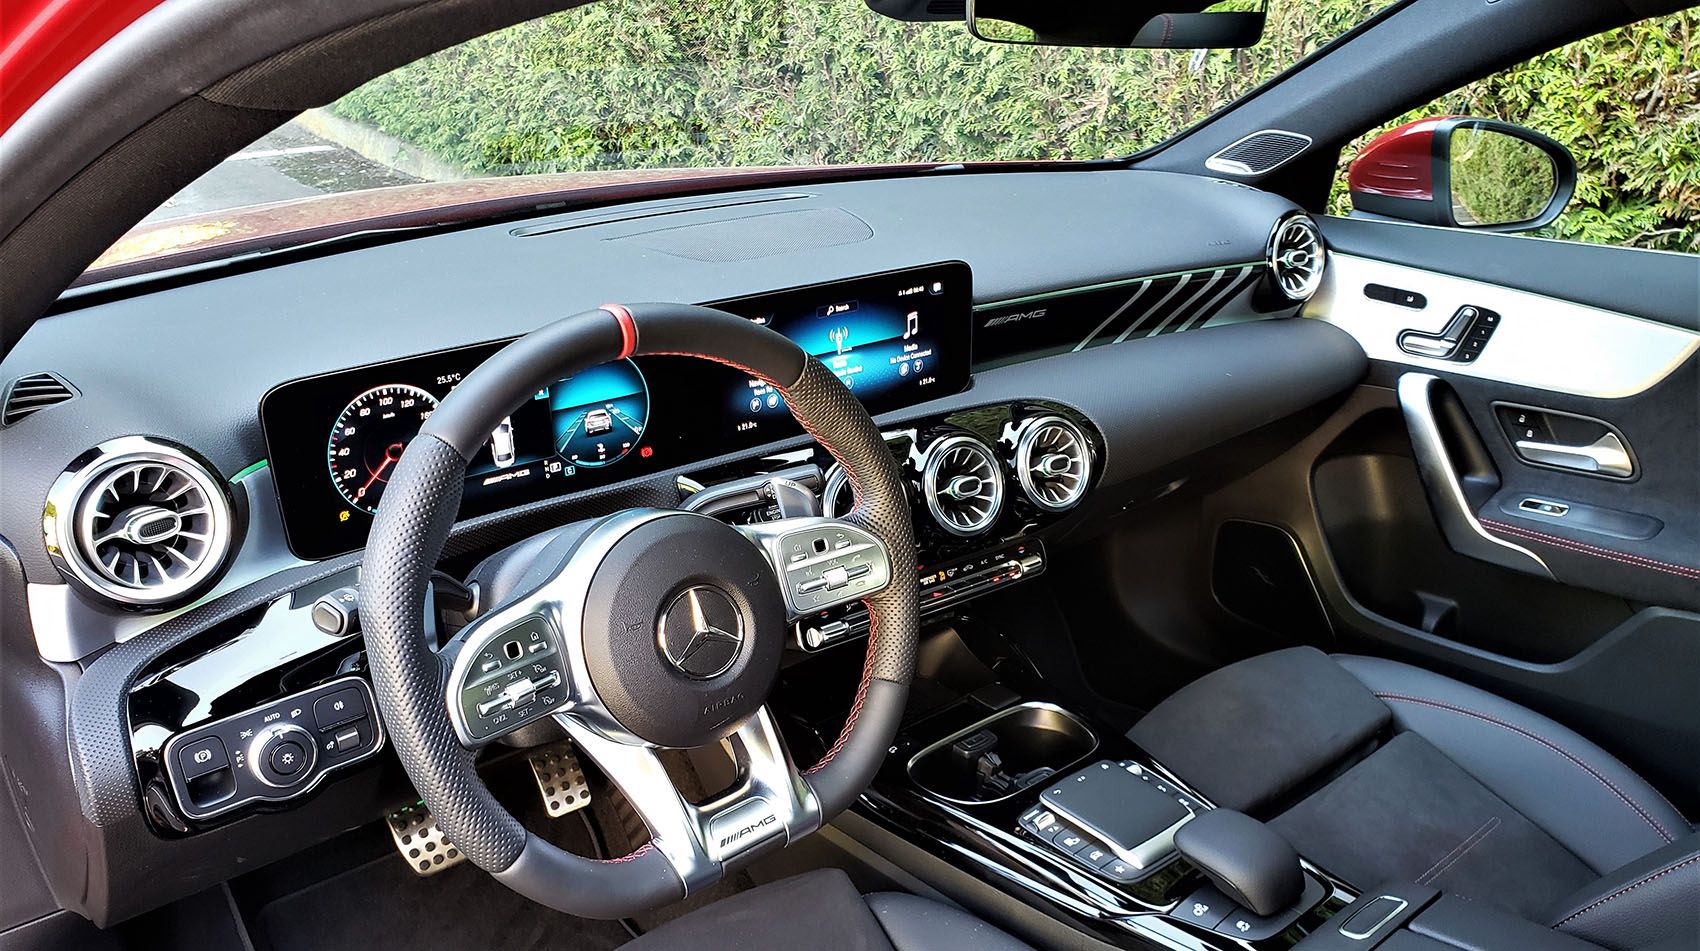 The 2021 Mercedes-AMG A35 4Matic Sedan dash and instrument panel.